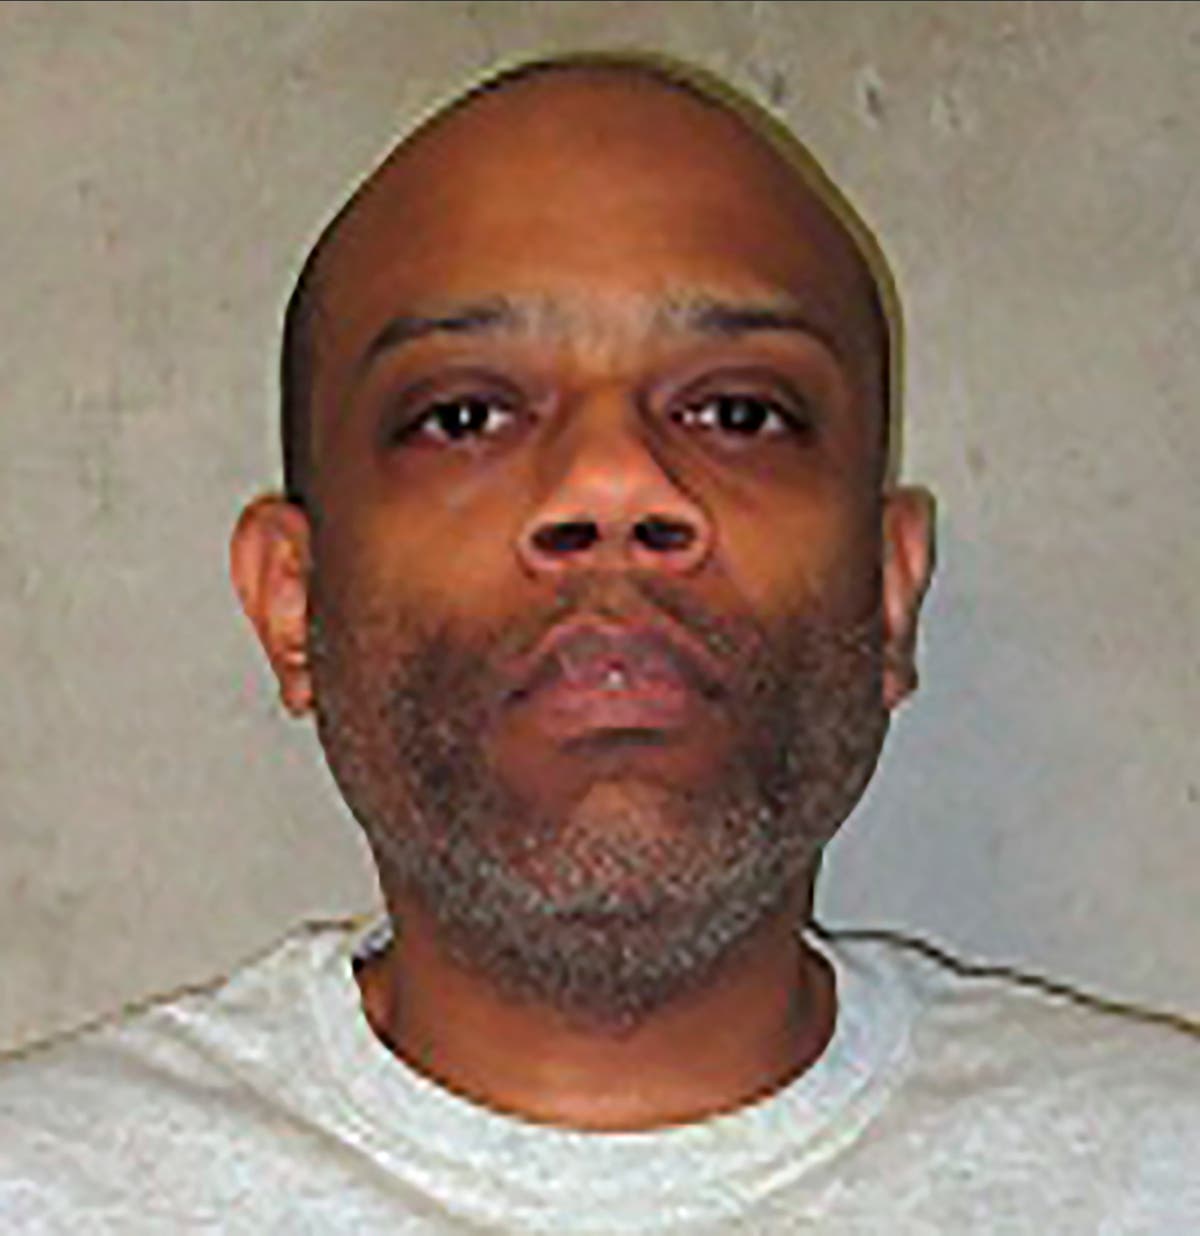 Appeals court paves the way for 2 more Oklahoma executions